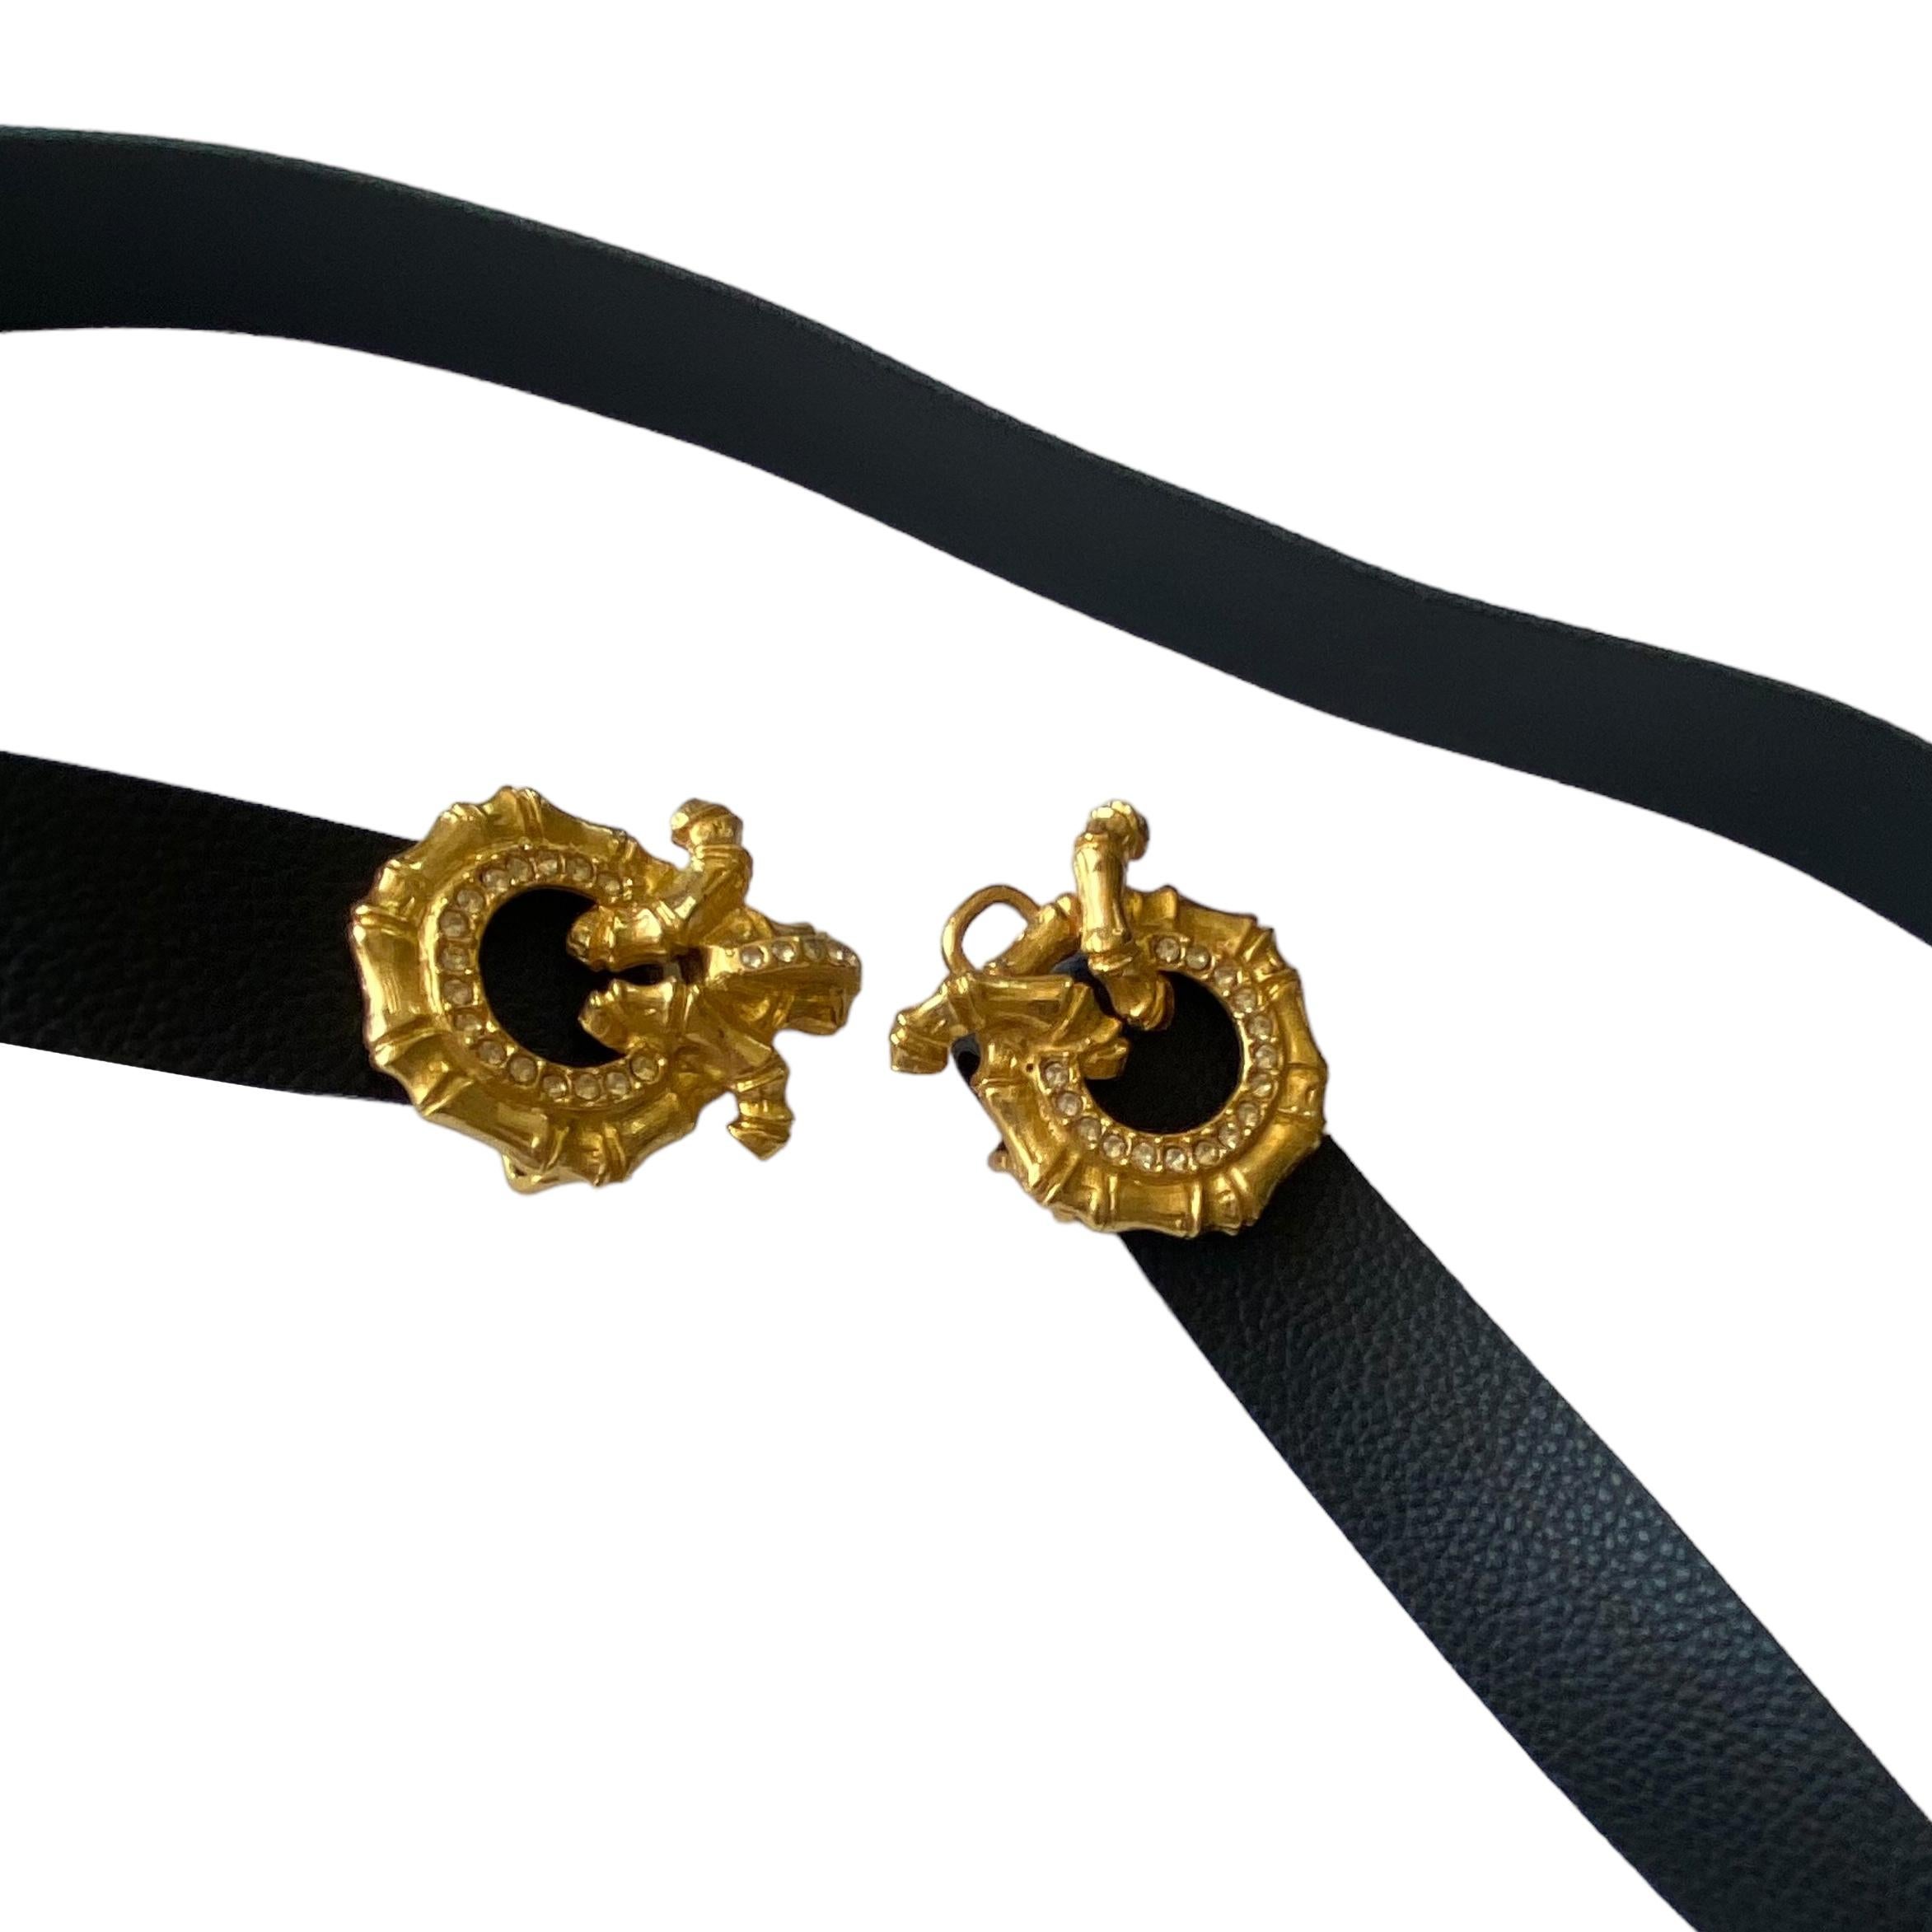 Mimi Di Vintage Signed 1974 Gold Fab Kissing Snails Belt In Excellent Condition For Sale In Boston, MA